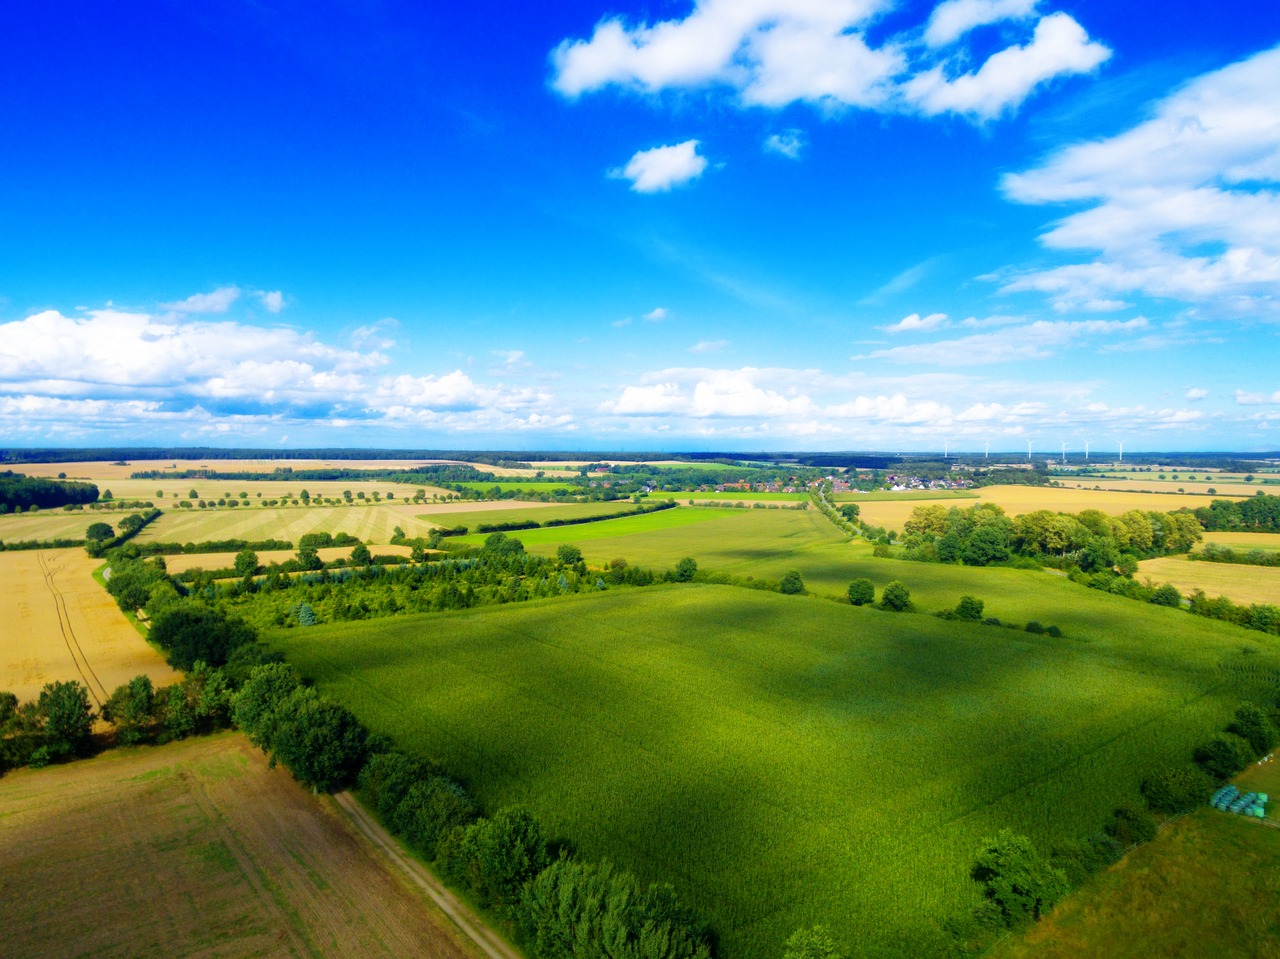 Sky Photography with Drones: Tips for Capturing Aerial Perspectives